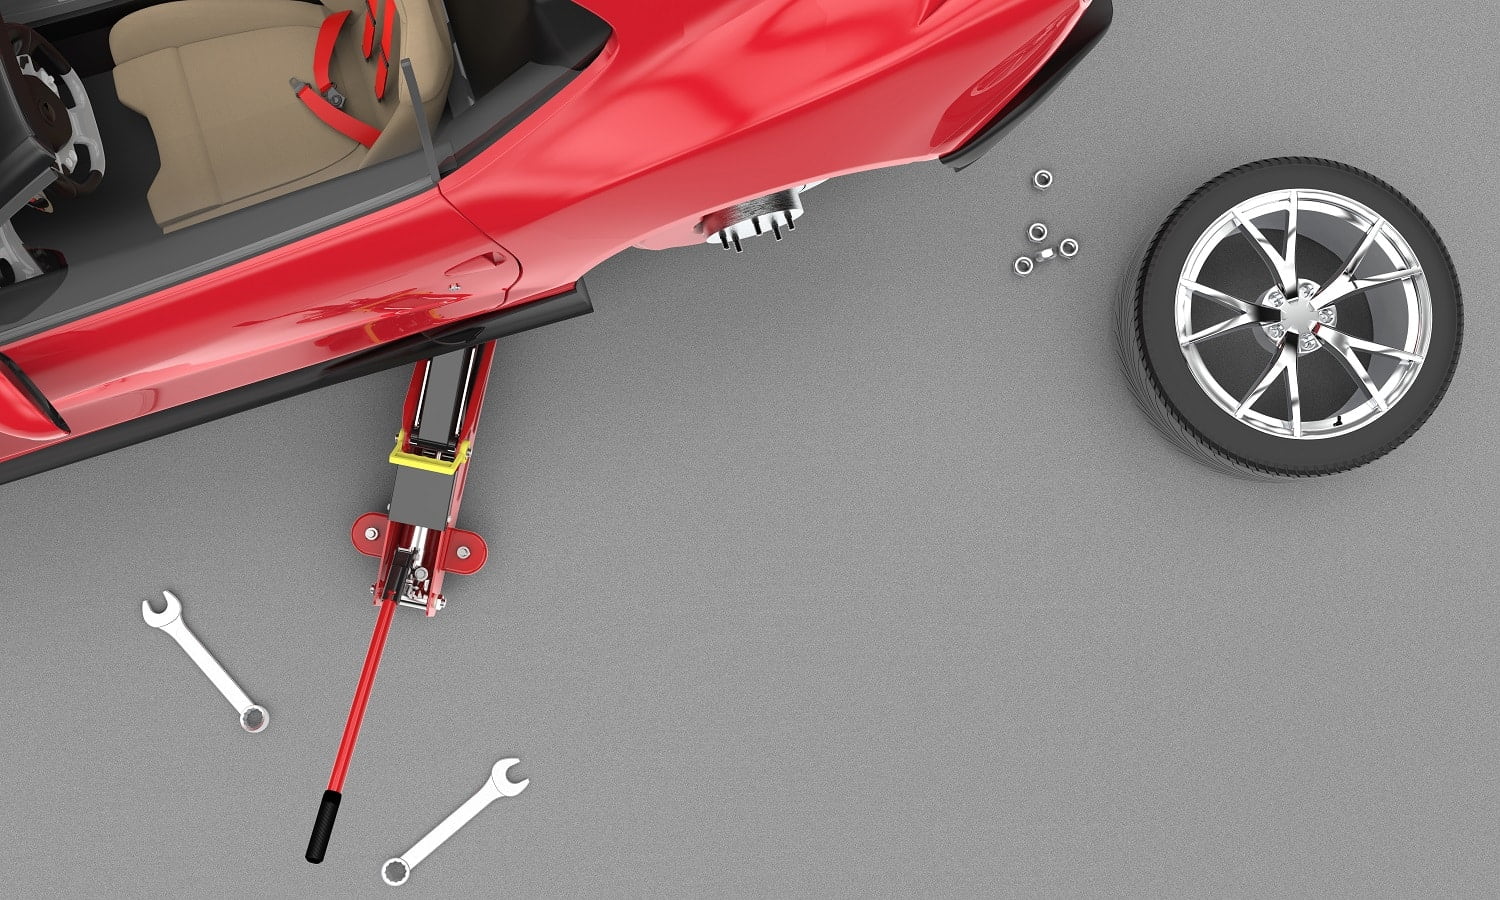 Top view of a car lifted with red hydraulic floor jack, 3D illustration